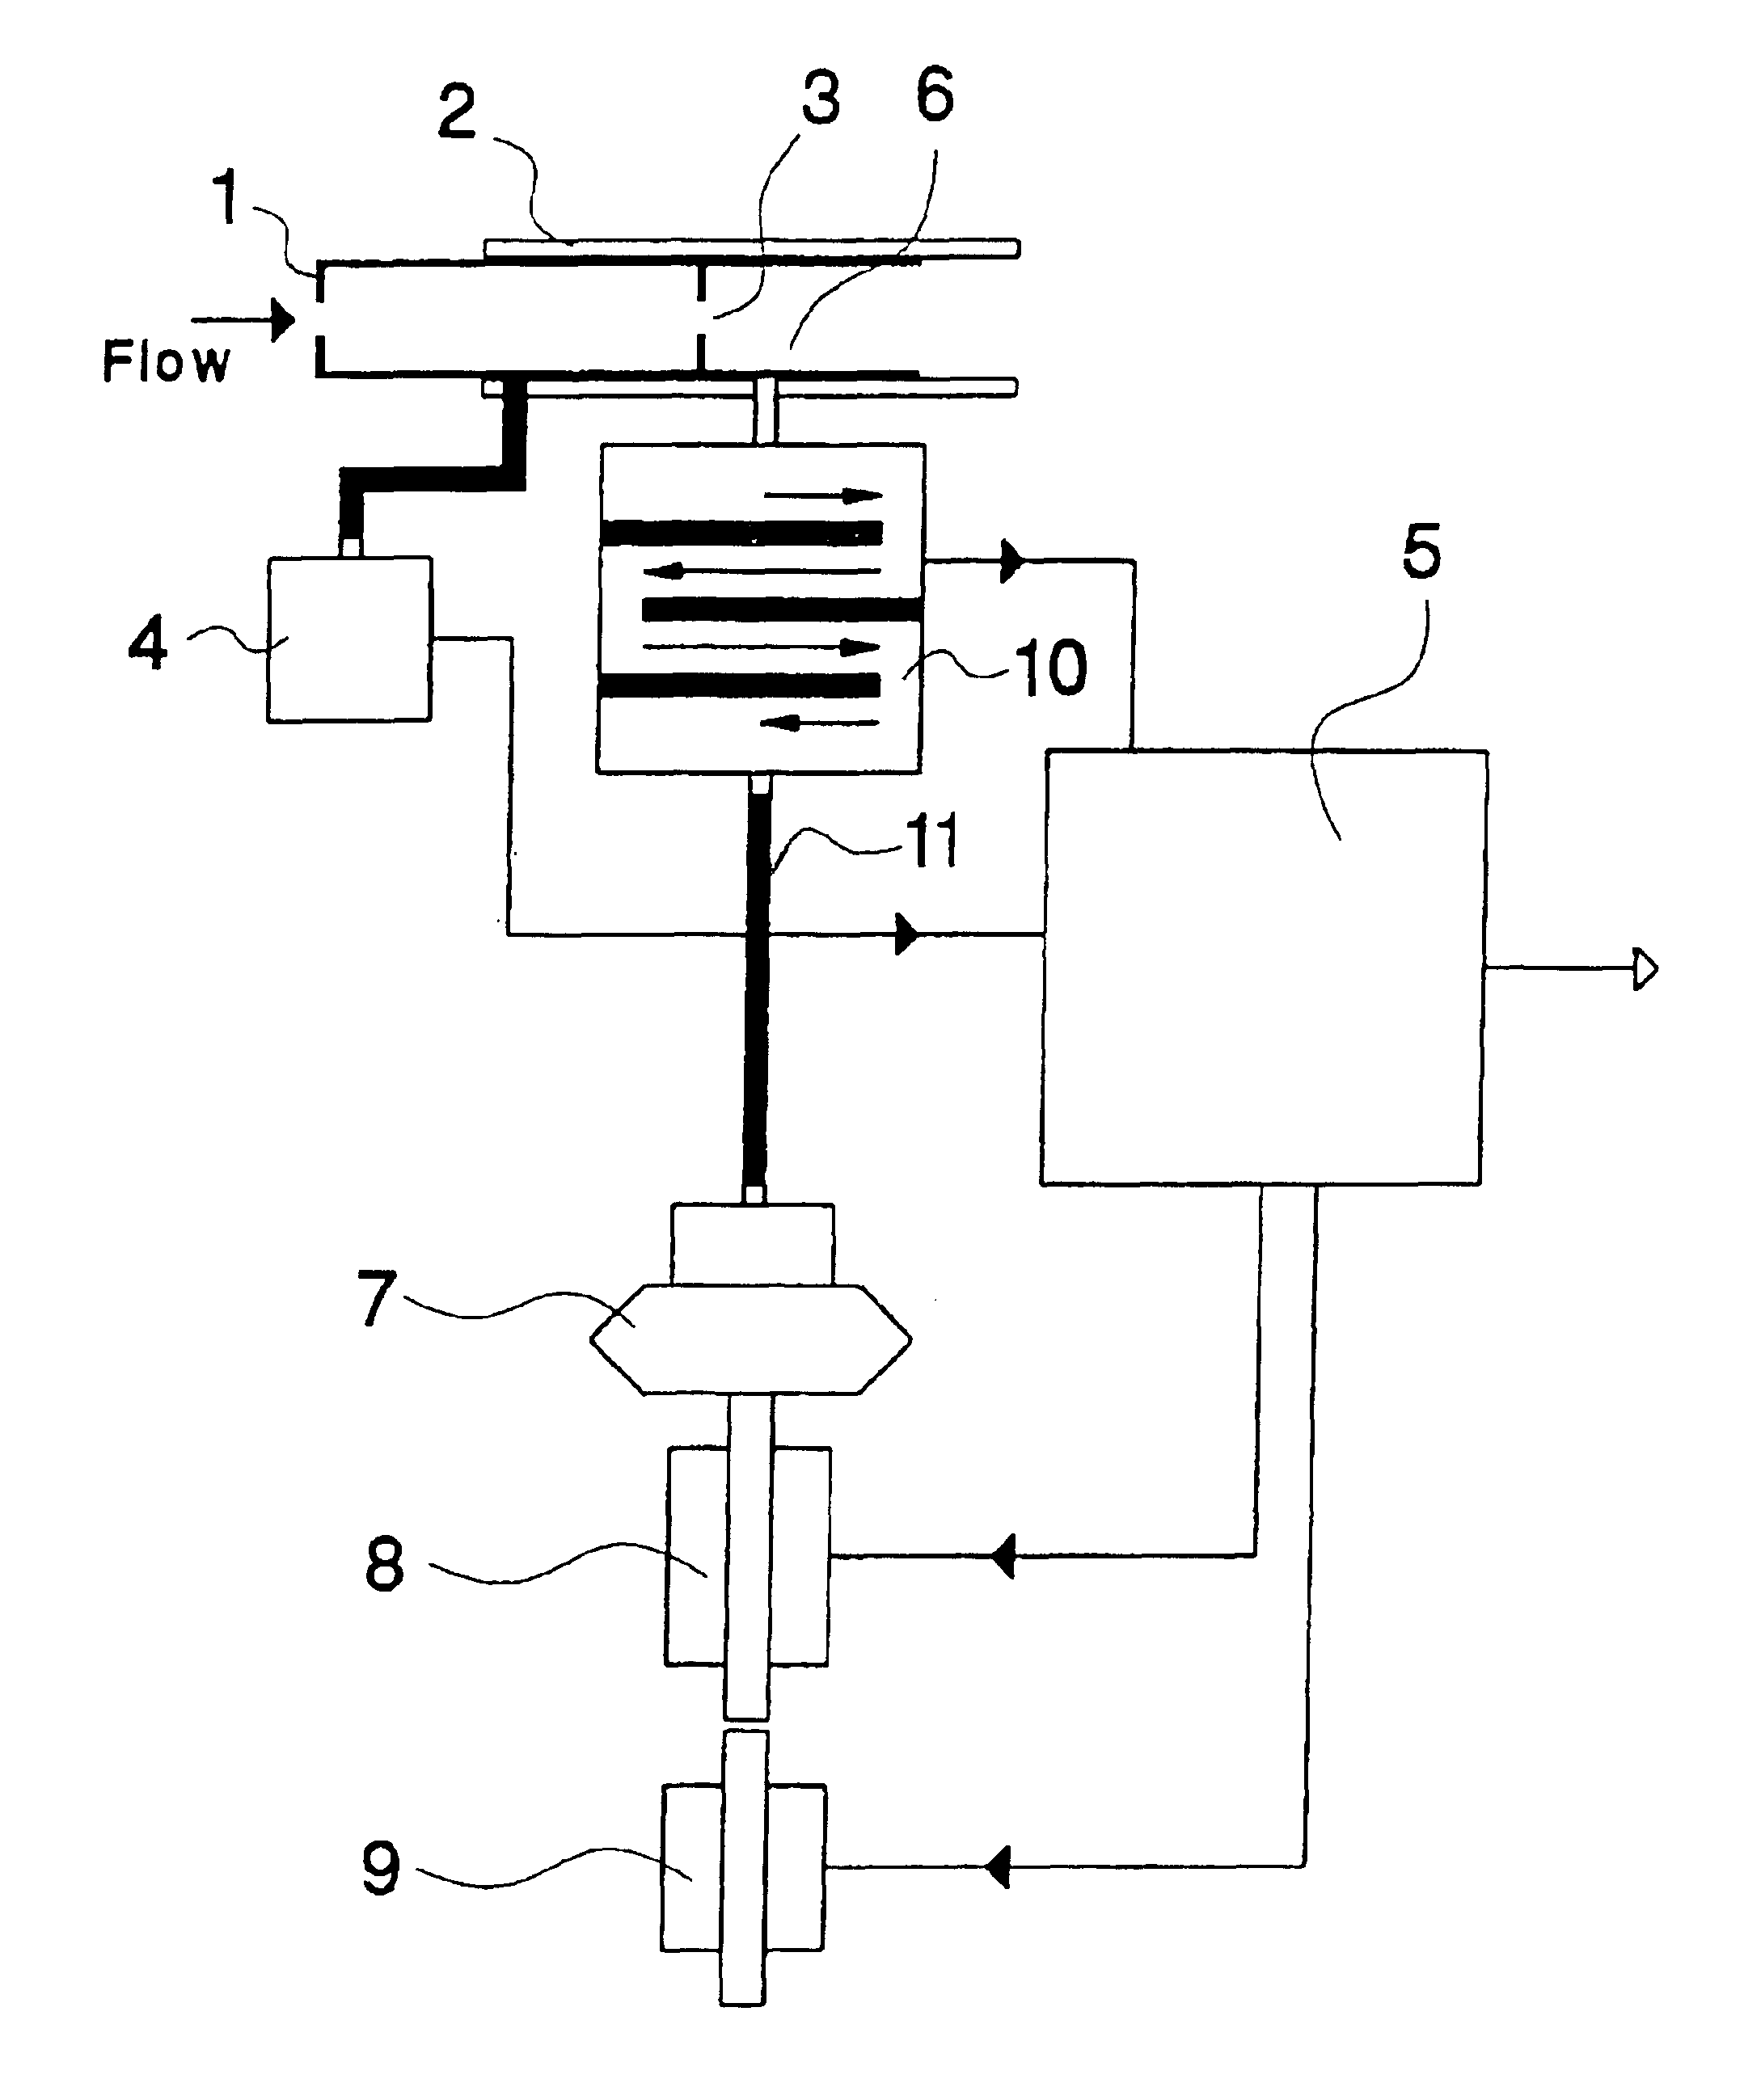 Device and process for measuring breath alcohol